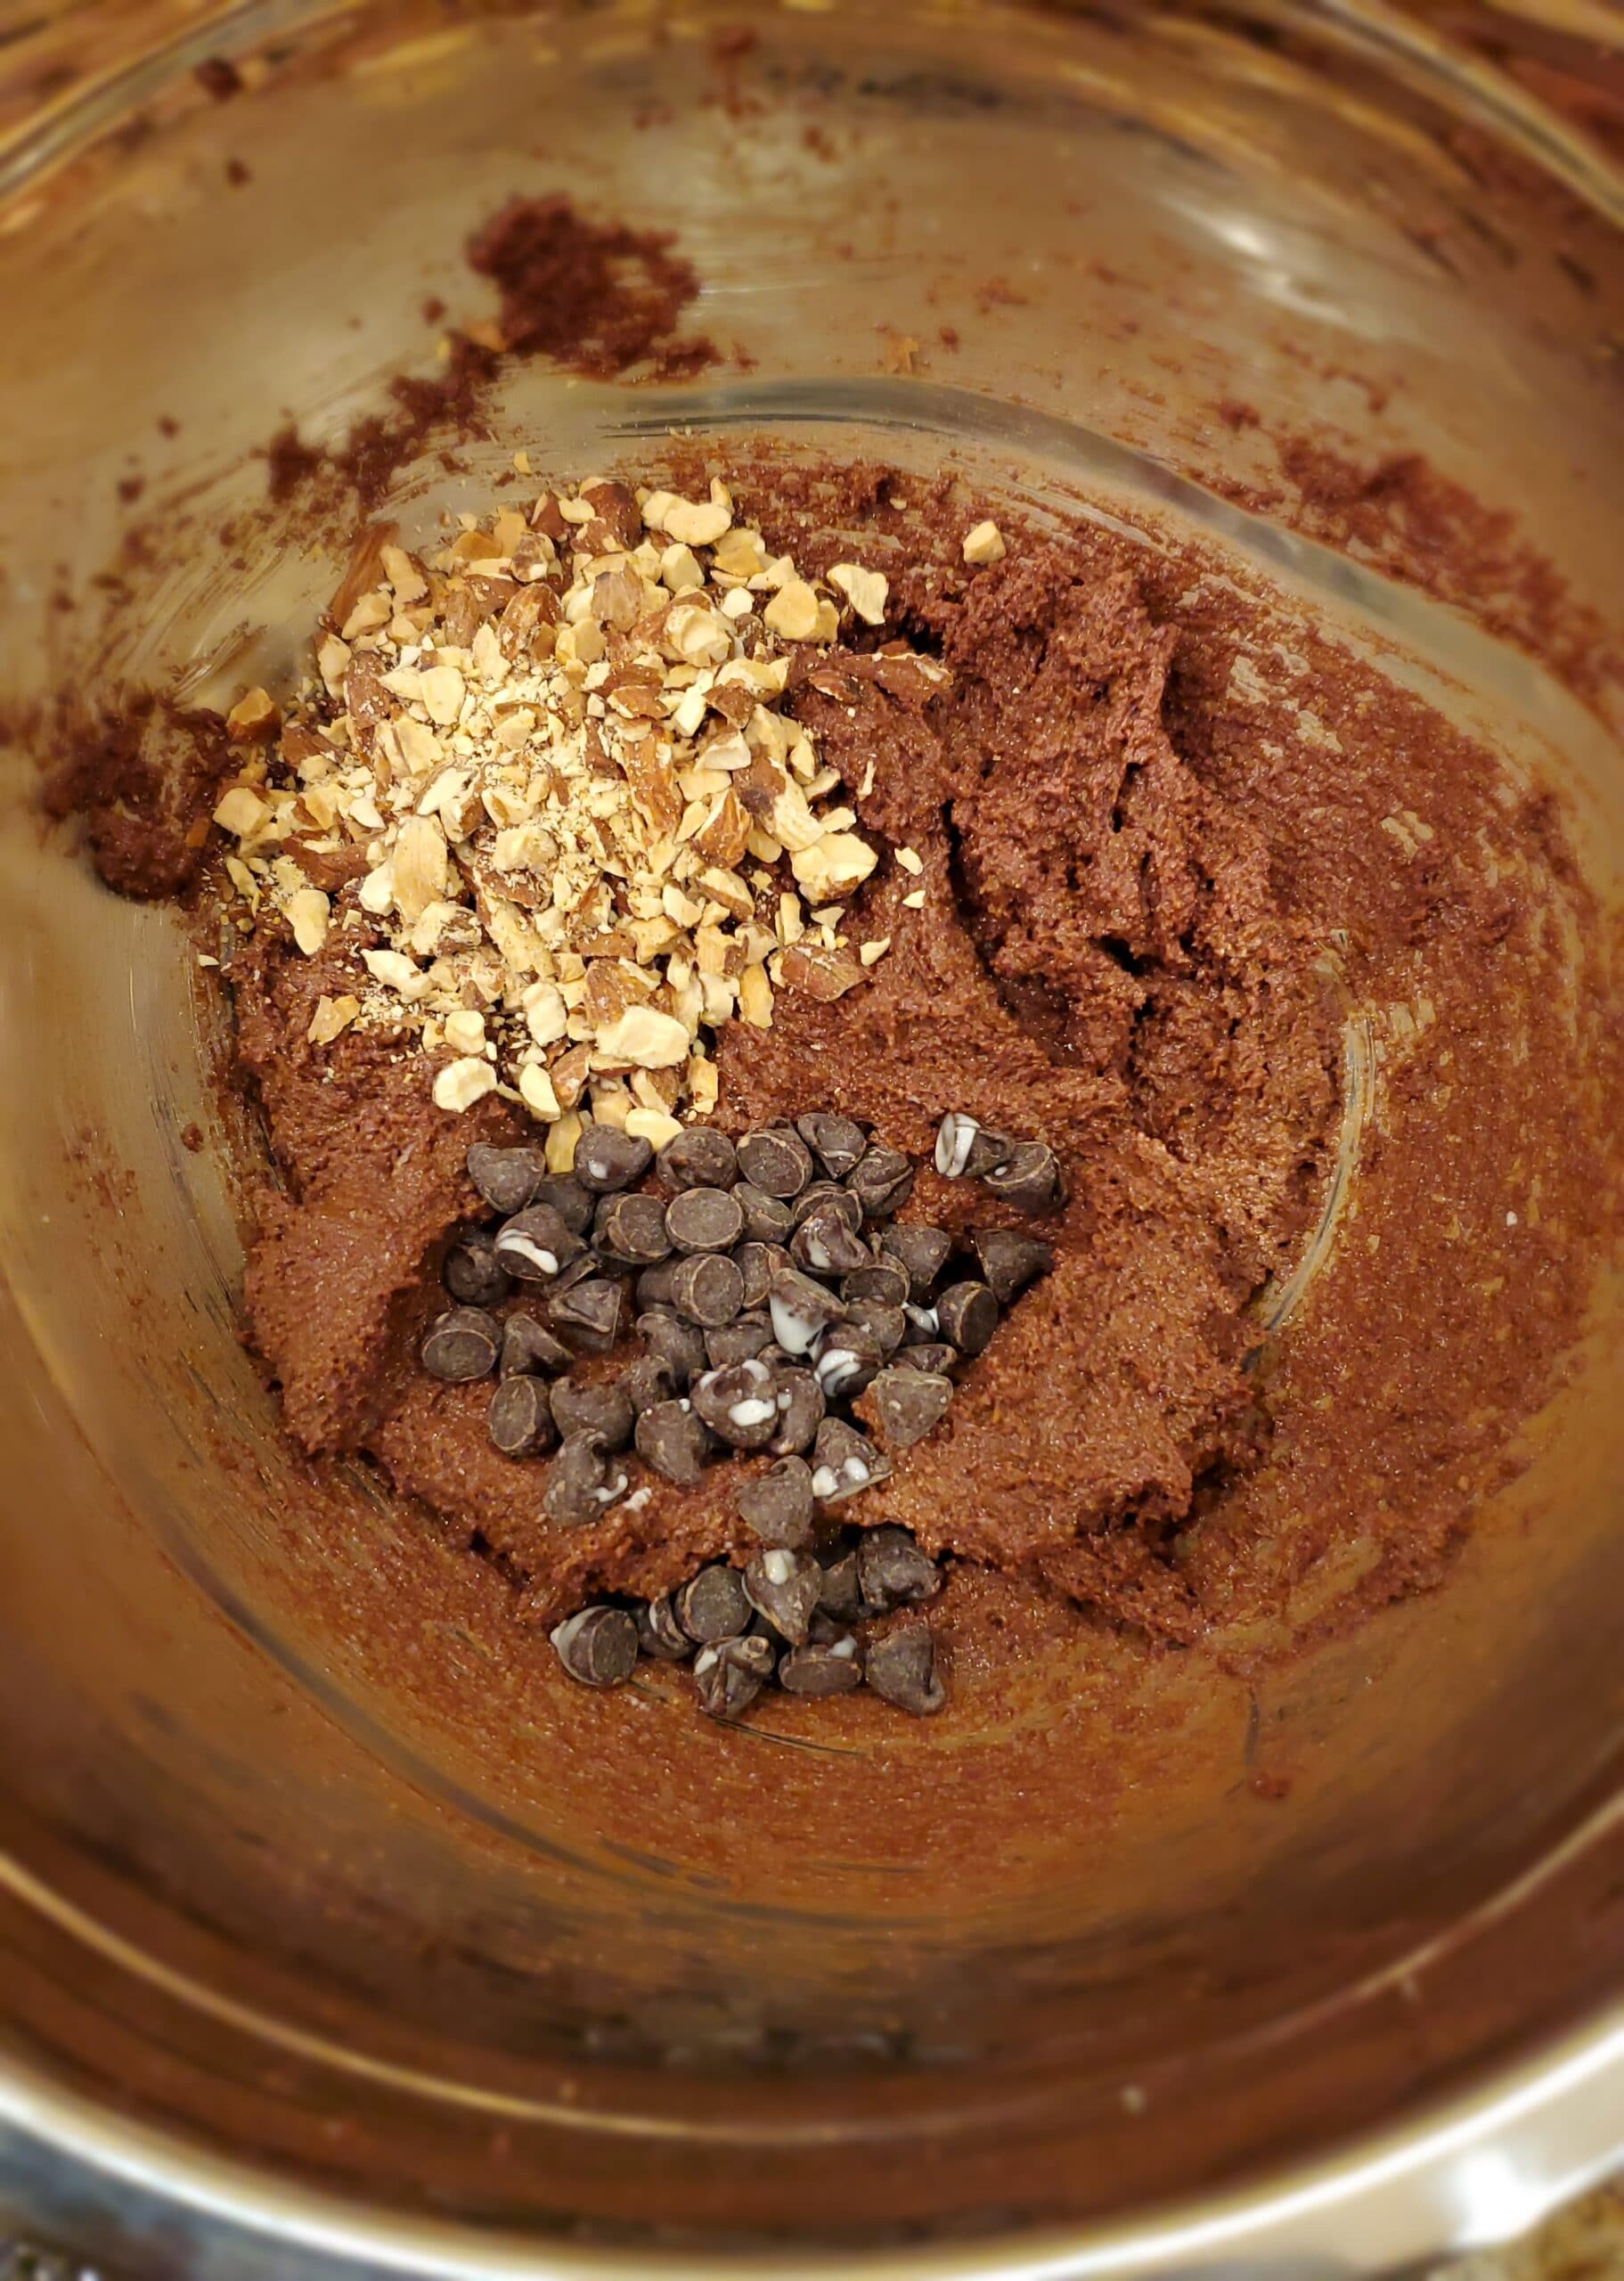 Stir in nuts and chocolate chips